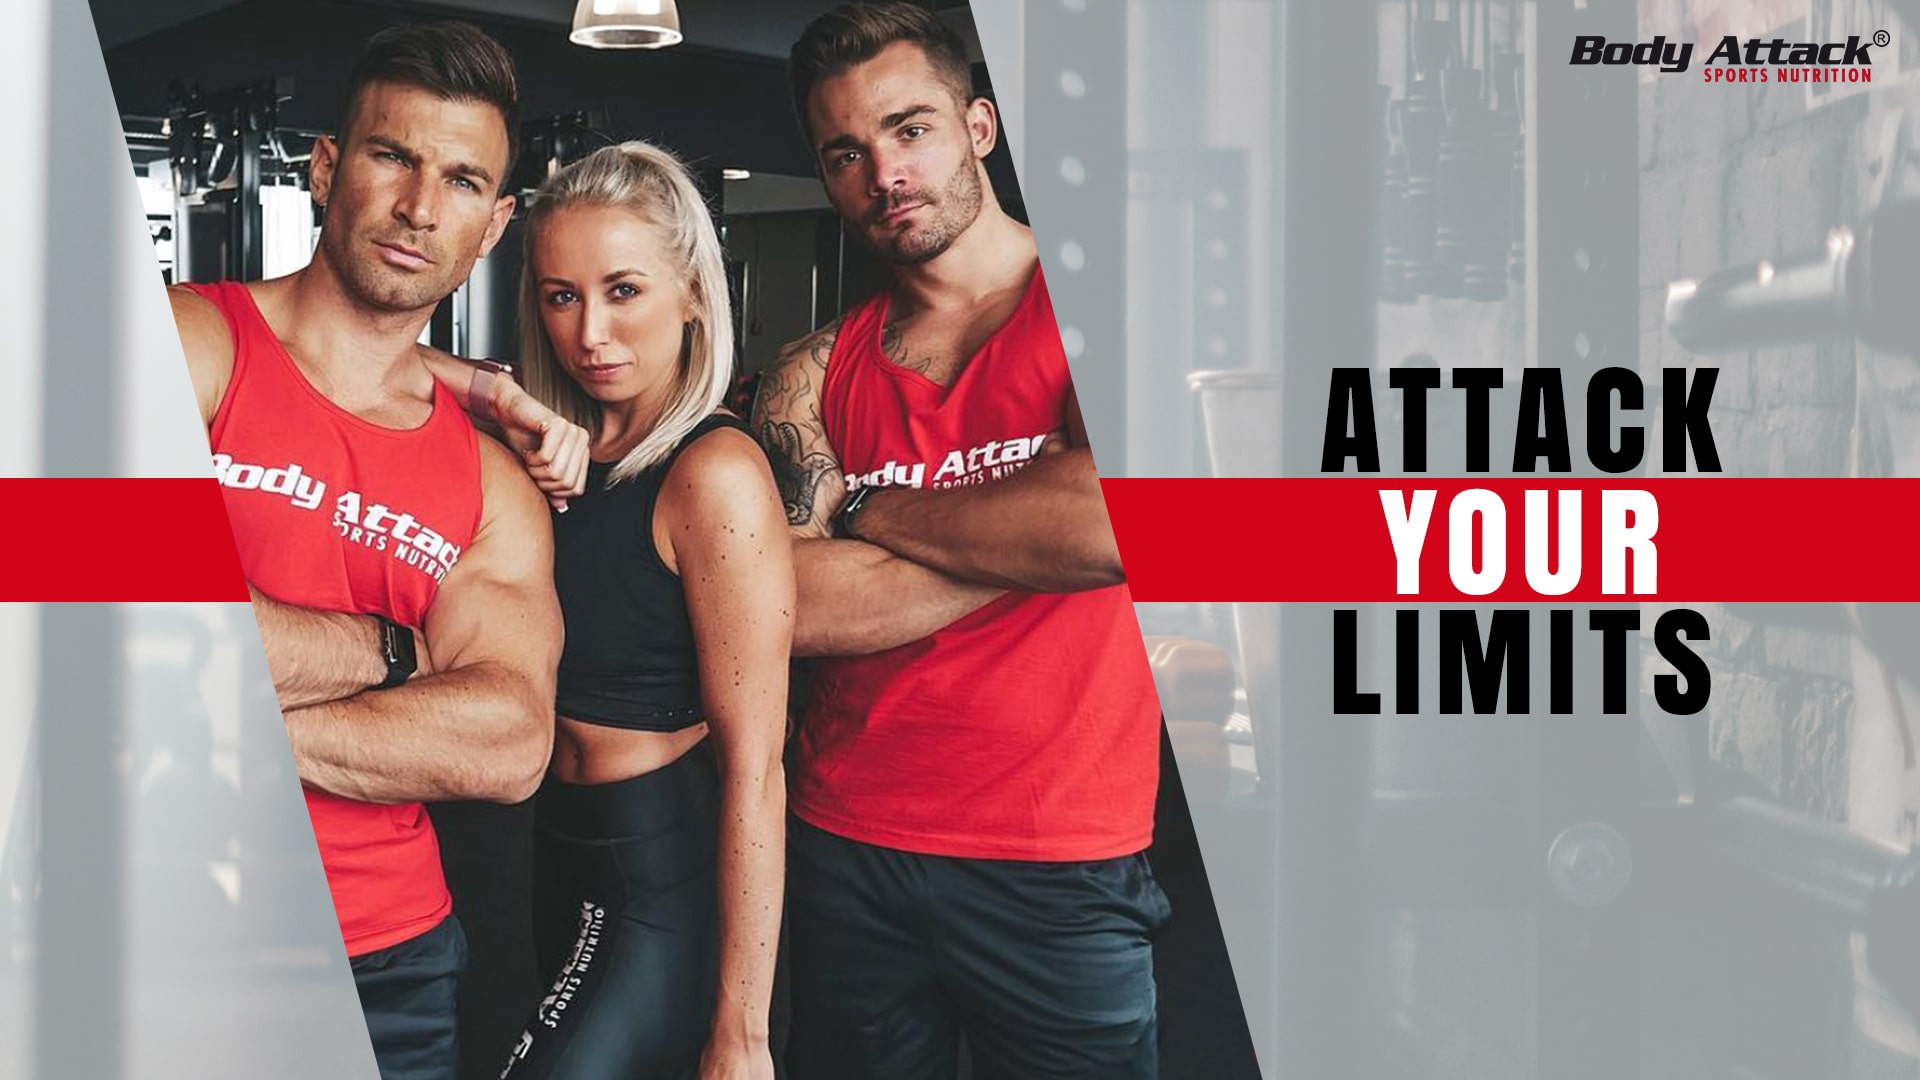 Body Attack - Attack Your Limits